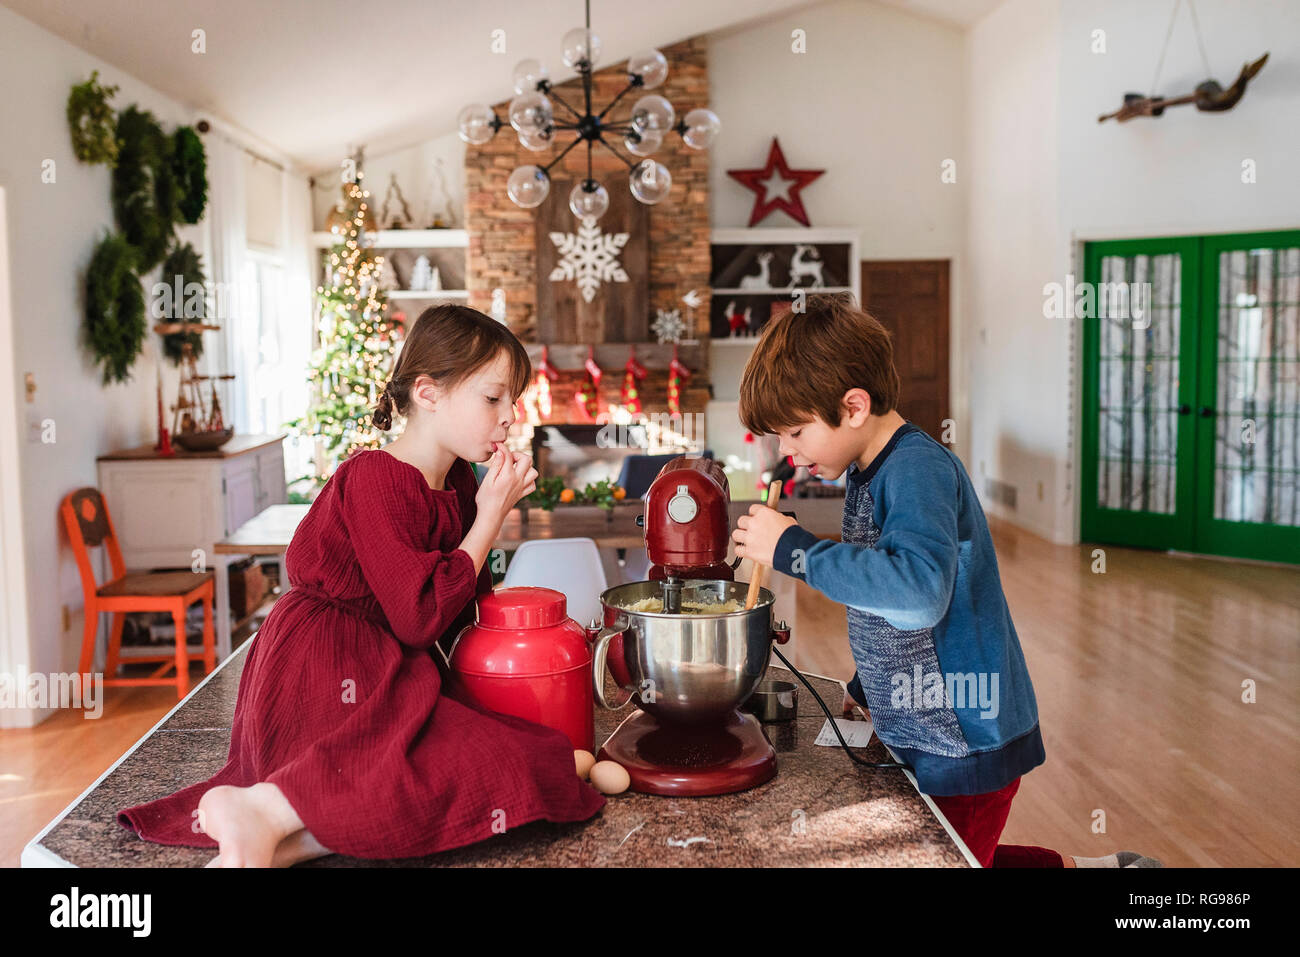 Two children in the kitchen making a cake Stock Photo